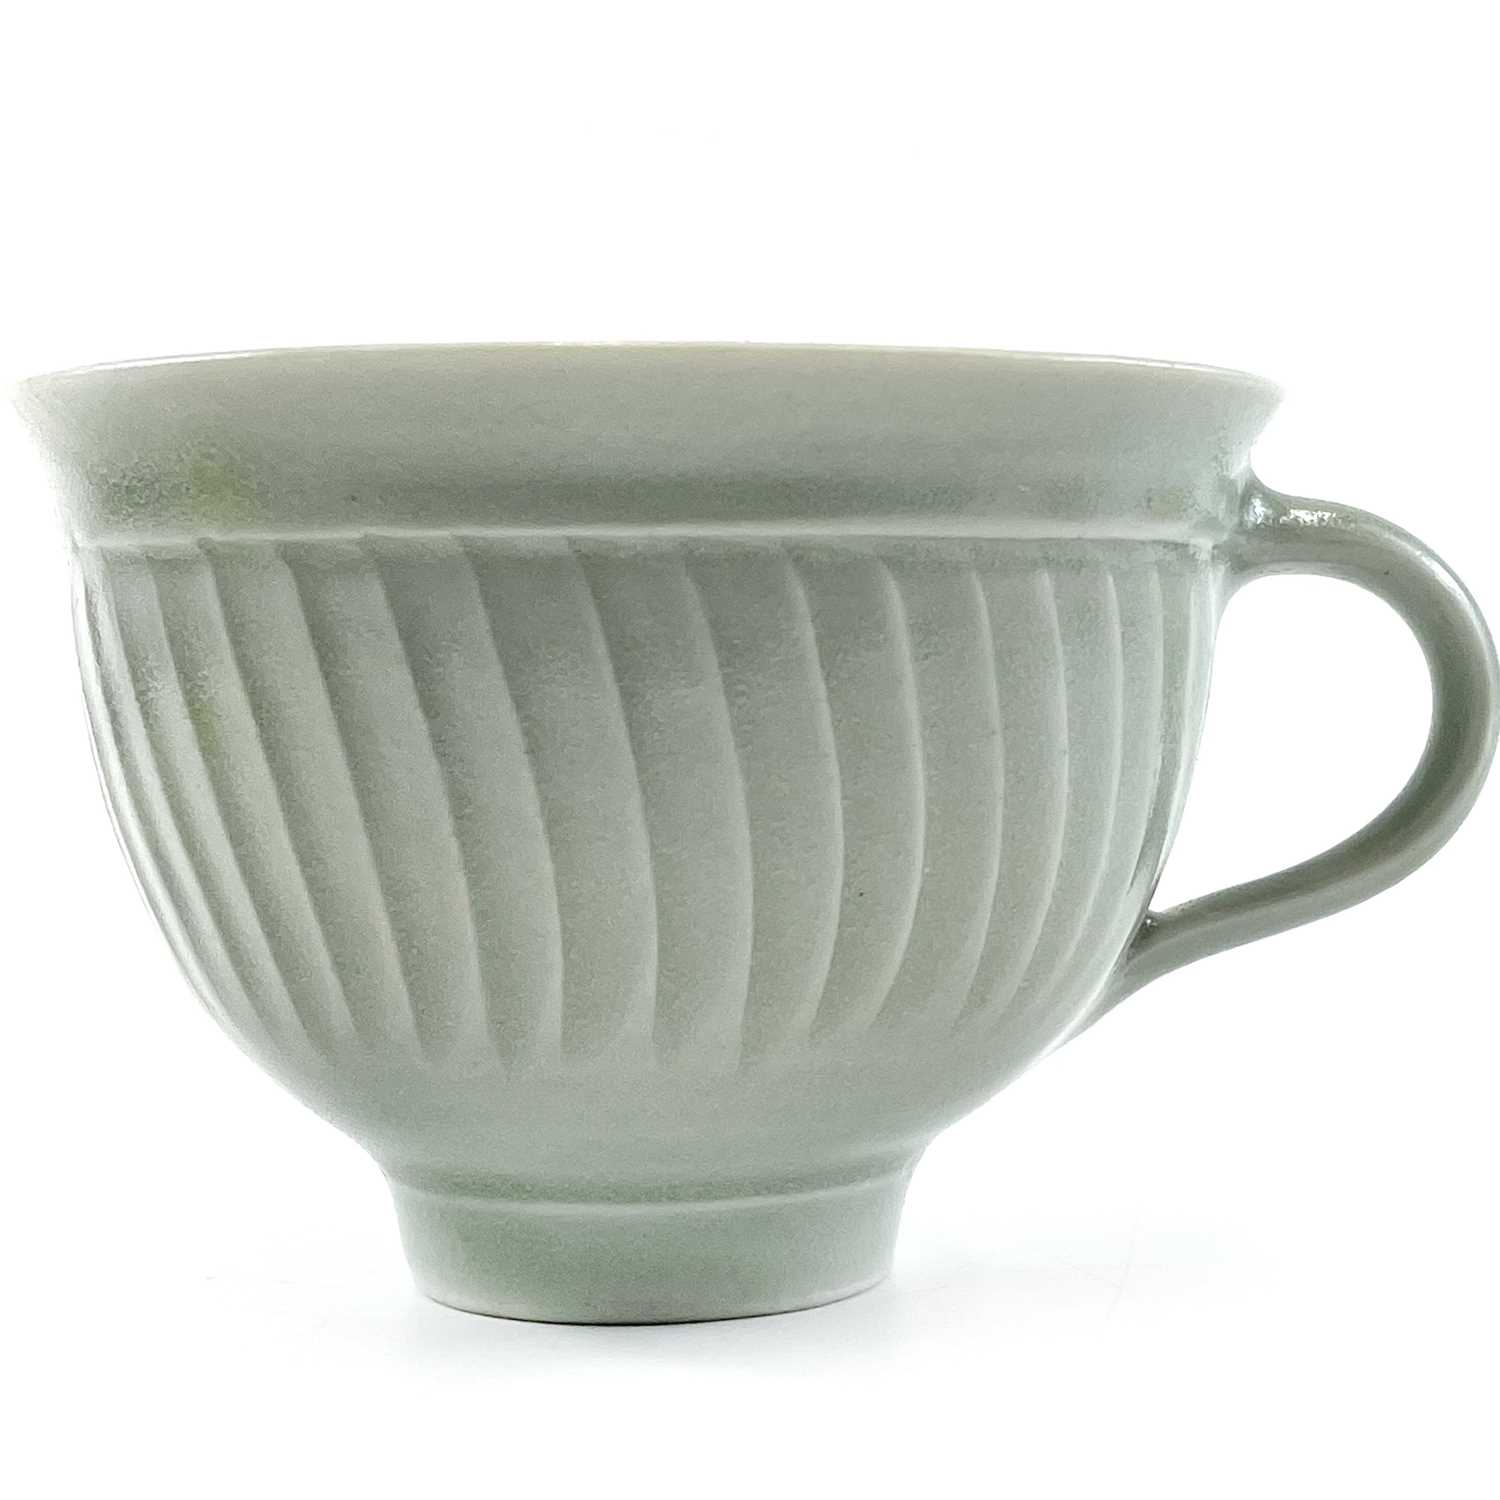 David LEACH (1911-2005 Cup and Saucer with Celadon glaze - Image 2 of 8